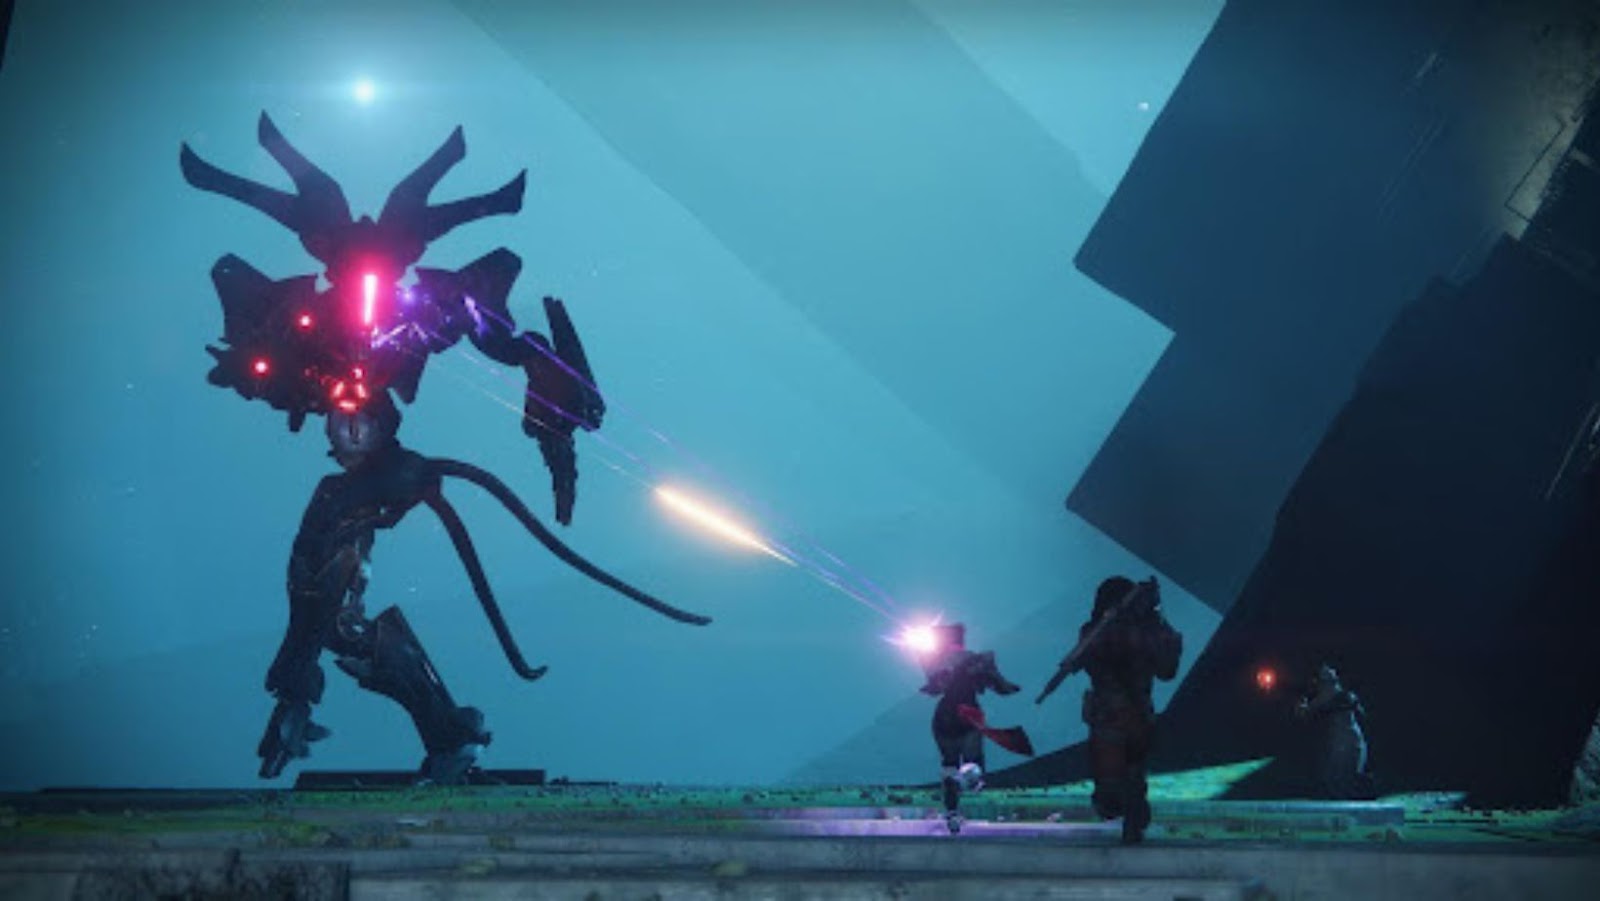 Get Your Weekly Fix Of Co-Op Content in Destiny 2